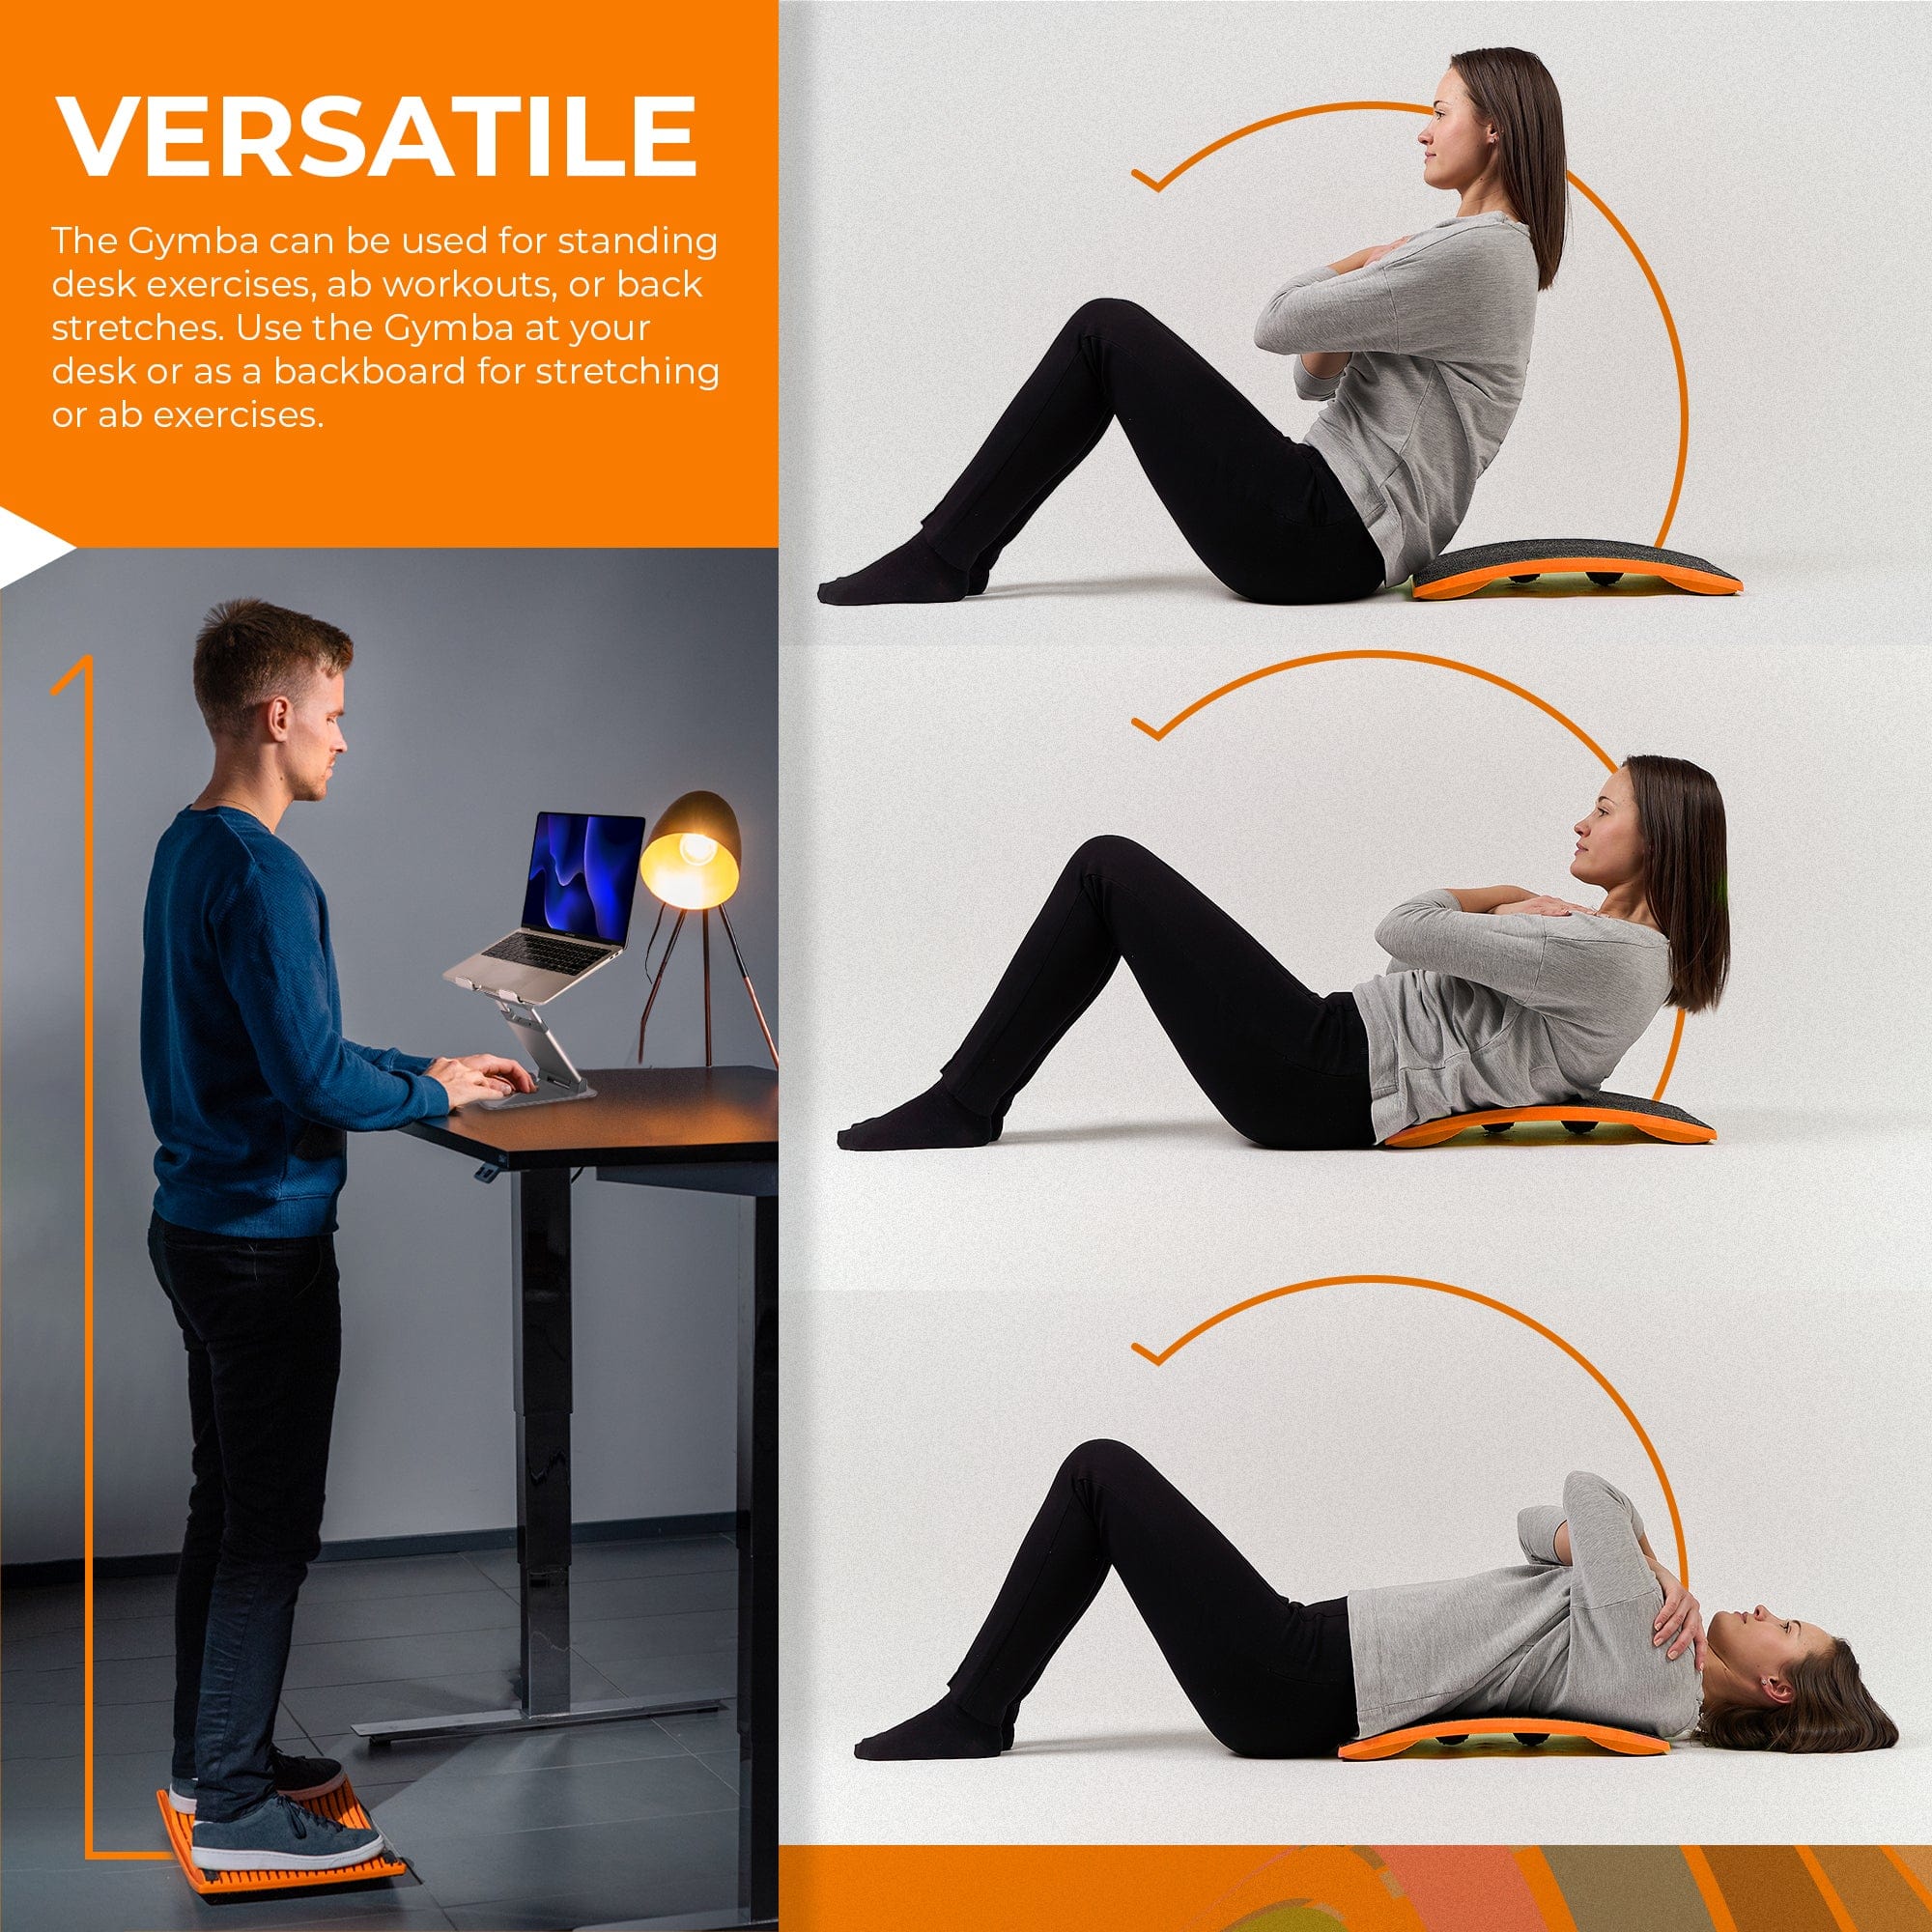 Versatility of Gymba Active Board for standing desk